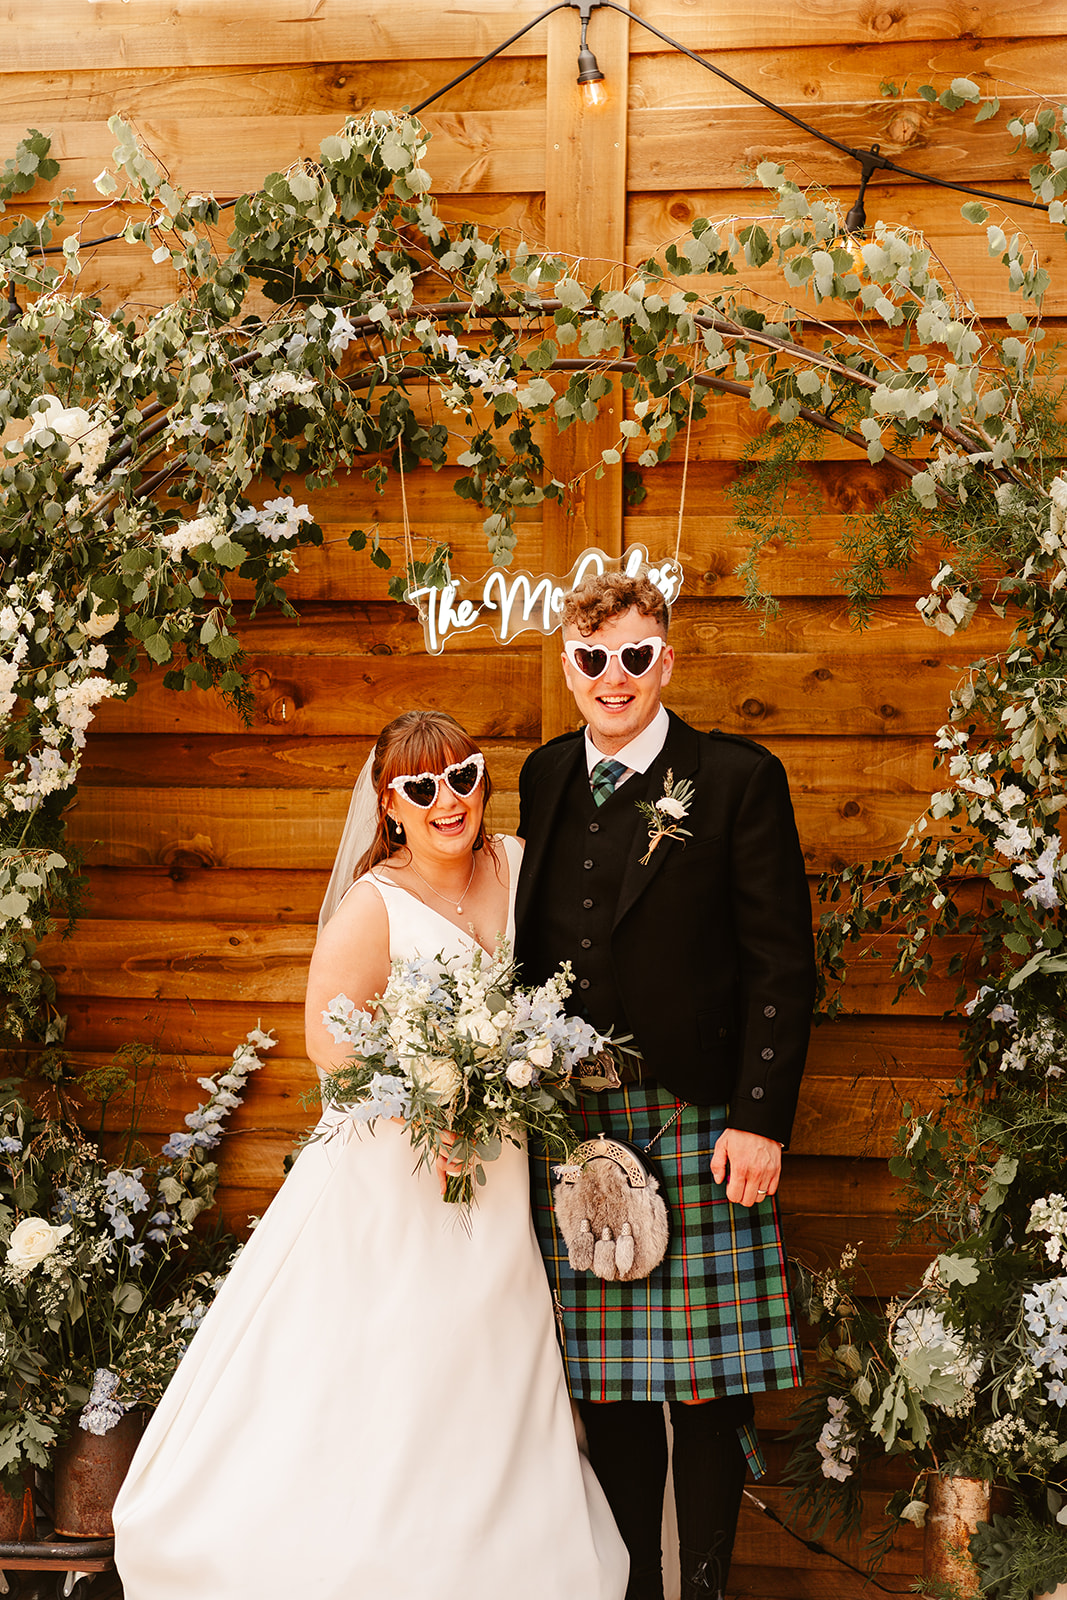 Bride and groom standing in front of a greenery arch, neon sign and rustic wooden panels at Elrick House Wedding Venue